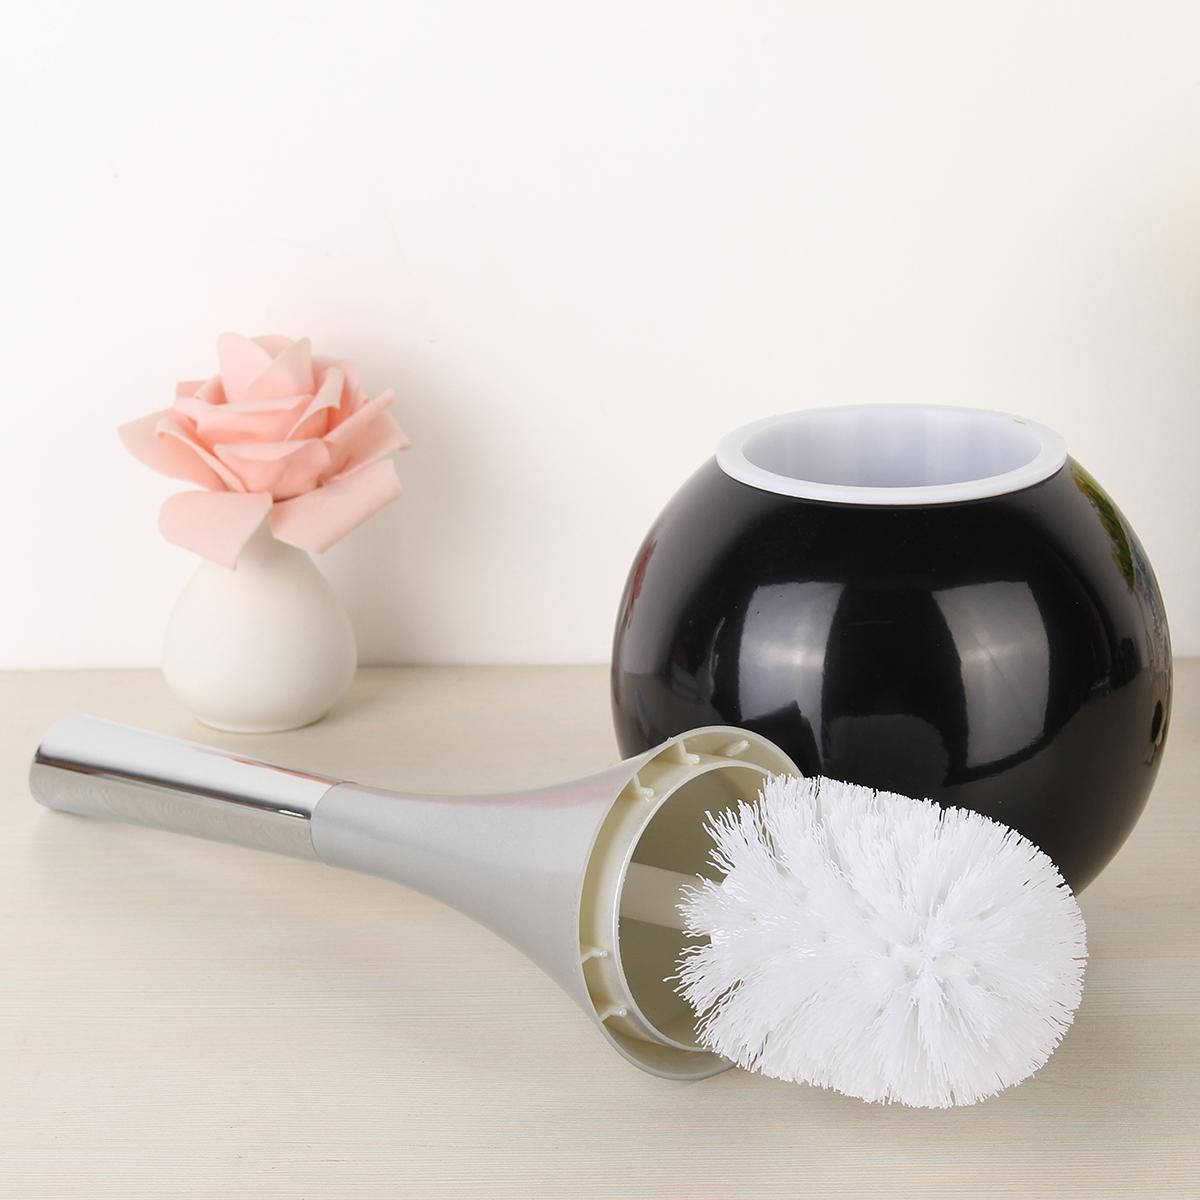 WC Bathroom Toilet Scrub Cleaning Brush Holder Set With Stainless Steel Sub Base 